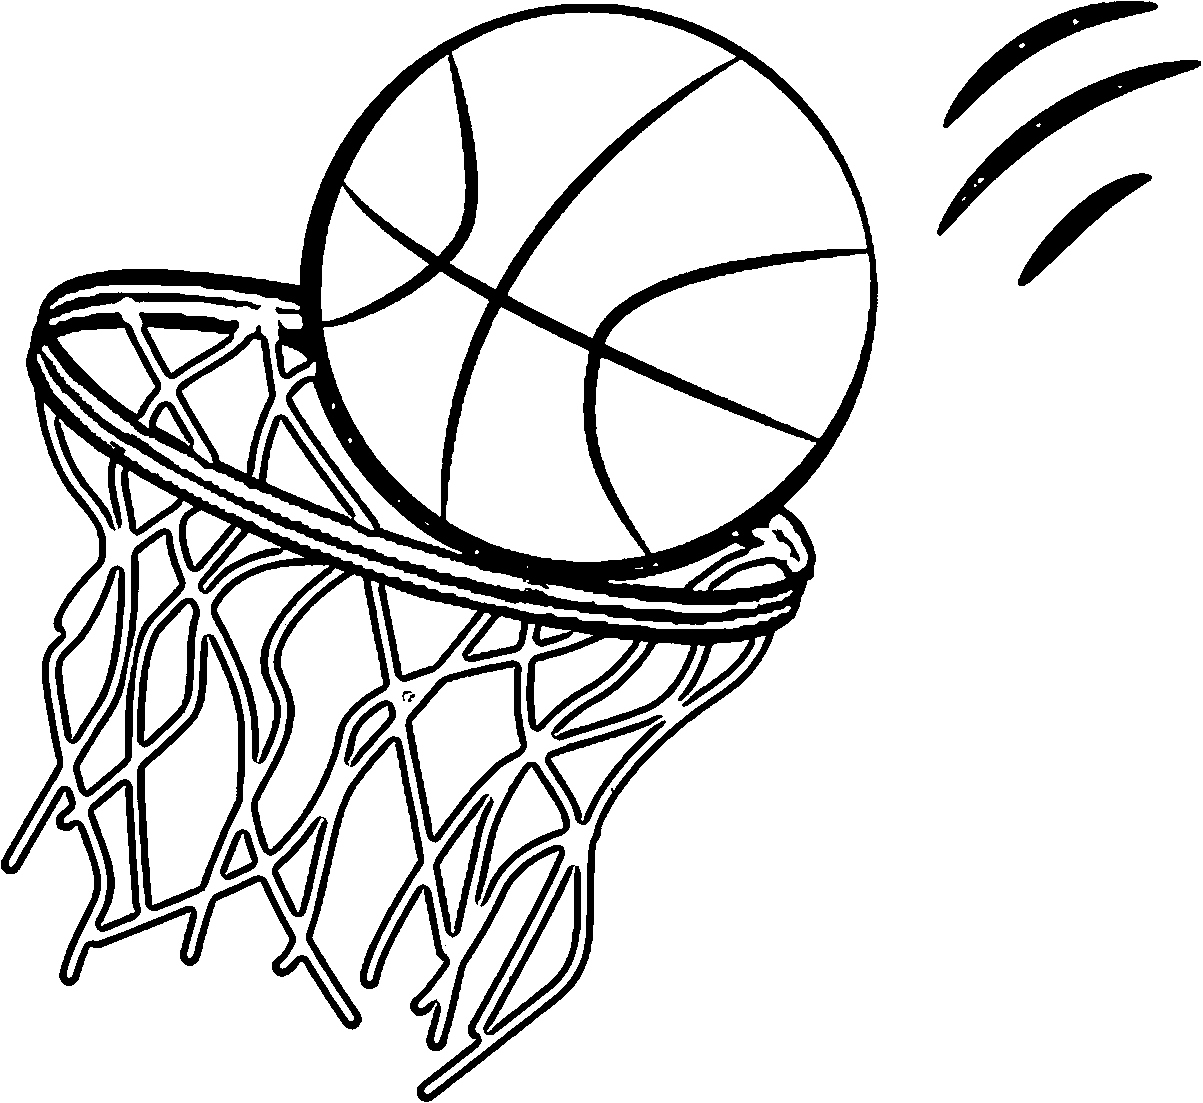 basketball-goal-coloring-pages-at-getcolorings-free-printable-colorings-pages-to-print-and